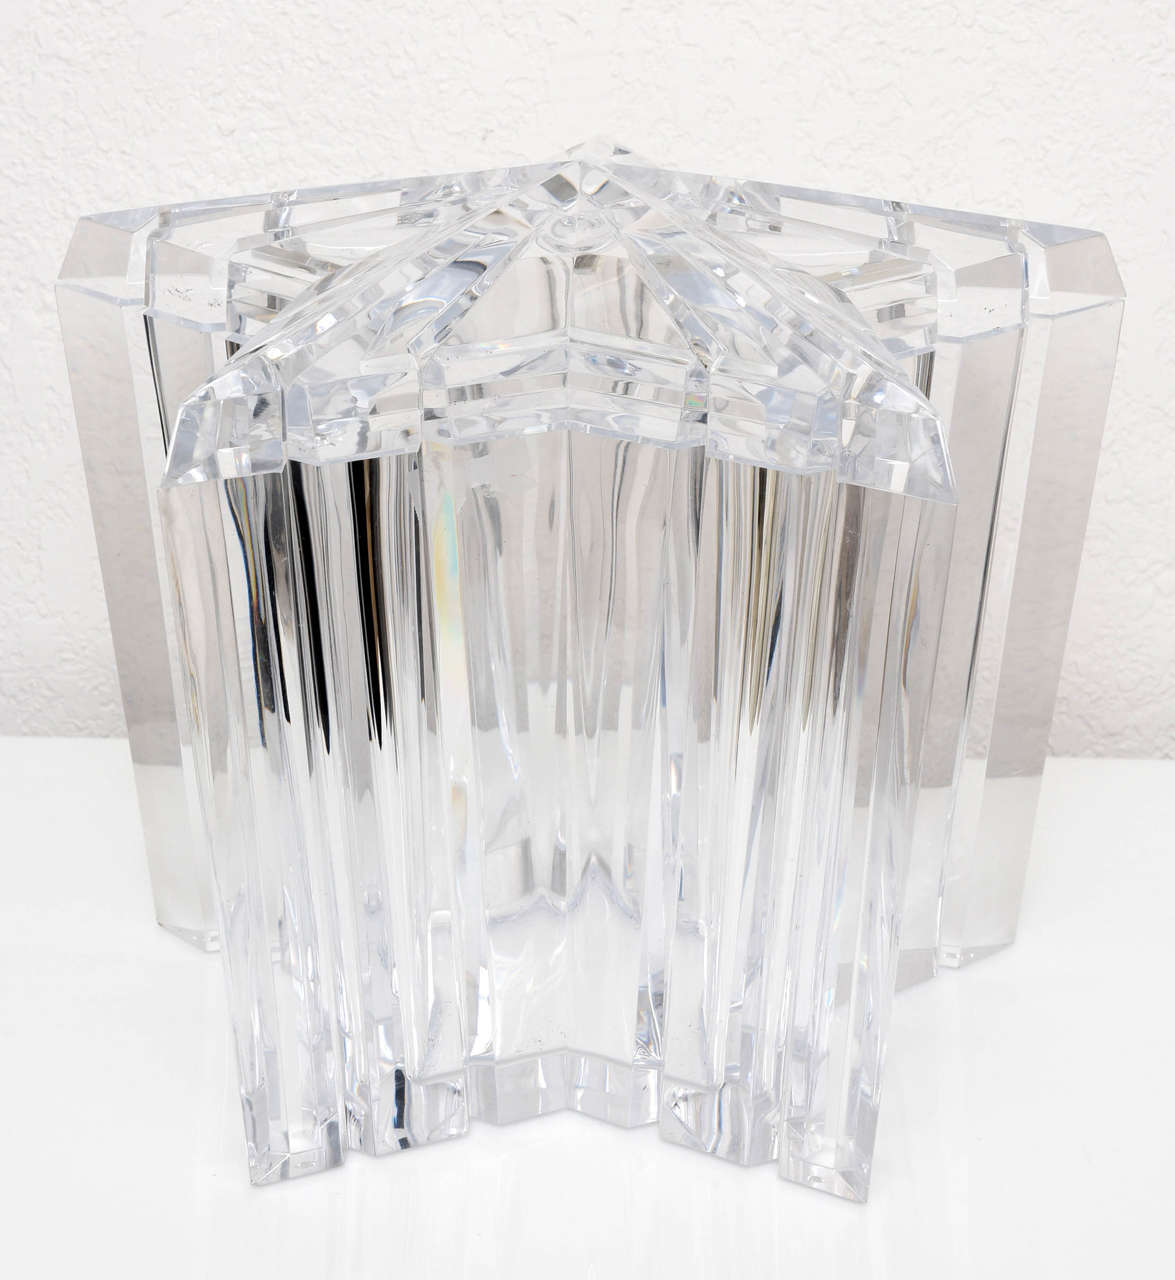 This is the ultimate glamorous and sophisticated ice bucket for your stylish "cocktail hour" created in the 1970s. The piece is fabricated in clear, polished Lucite with a faceted/cut detail to it and the lid pivots for ease of